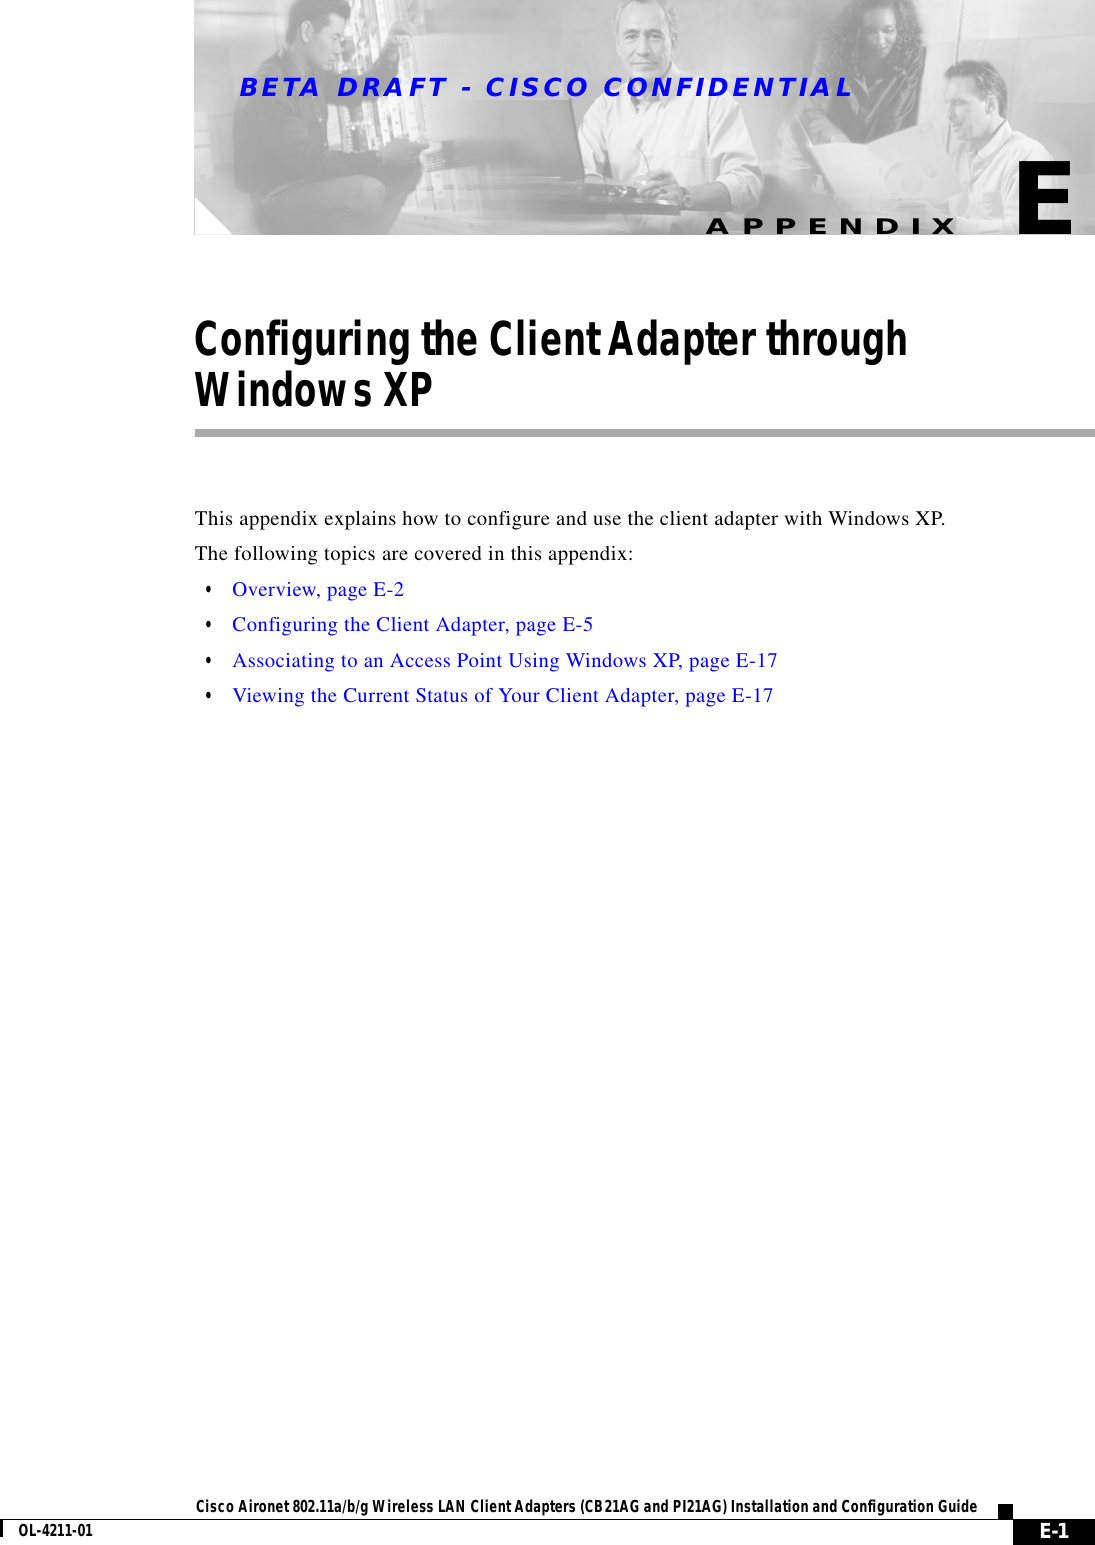 BETA DRAFT - CISCO CONFIDENTIALE-1Cisco Aironet 802.11a/b/g Wireless LAN Client Adapters (CB21AG and PI21AG) Installation and Configuration GuideOL-4211-01APPENDIXEConfiguring the Client Adapter throughWindows XPThis appendix explains how to configure and use the client adapter with Windows XP.The following topics are covered in this appendix:•Overview, page E-2•Configuring the Client Adapter, page E-5•Associating to an Access Point Using Windows XP, page E-17•Viewing the Current Status of Your Client Adapter, page E-17